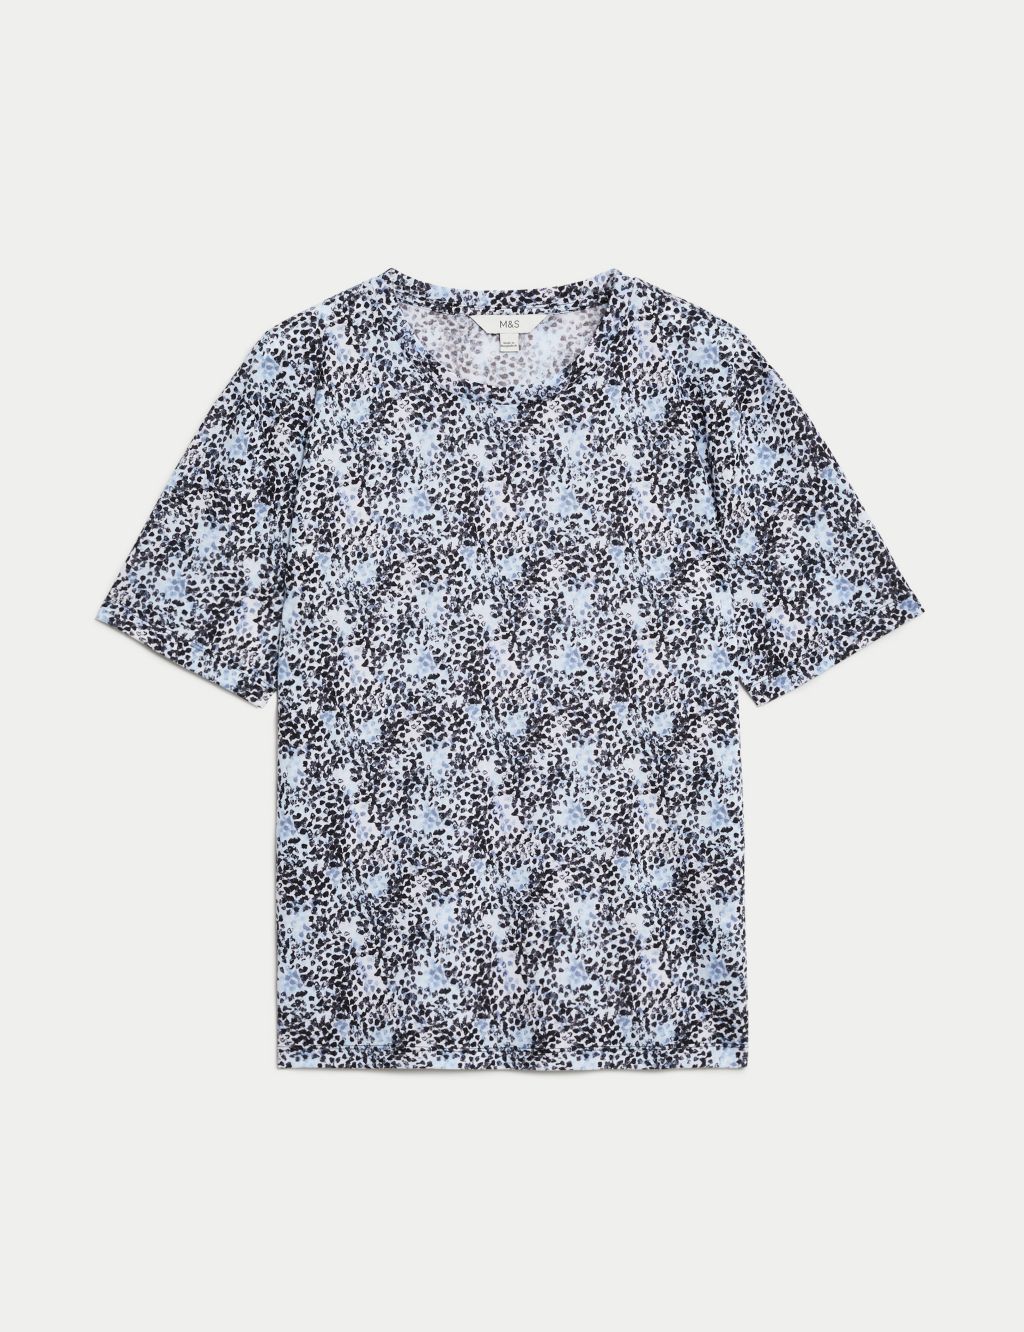 Printed Relaxed T-Shirt image 2